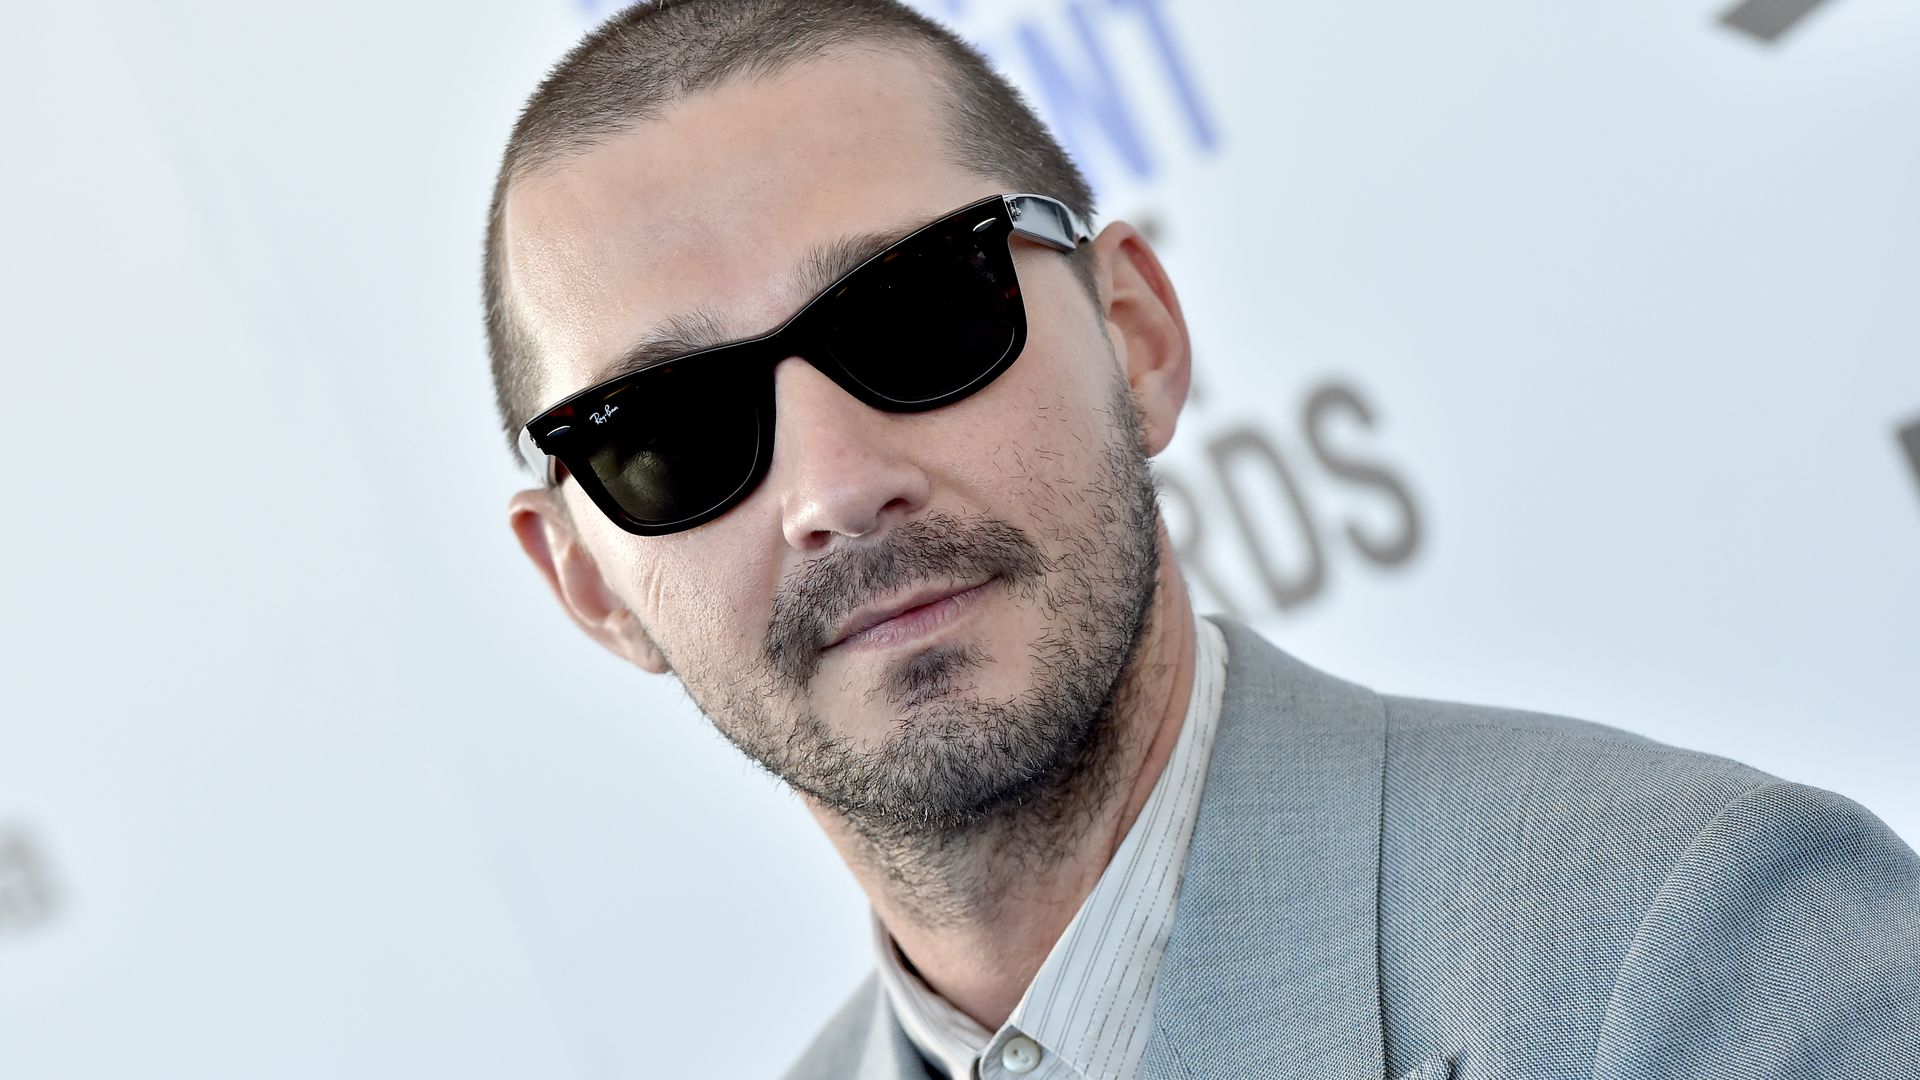 Shia LaBeouf intends to take an unusual career turn ahead of trial later this year